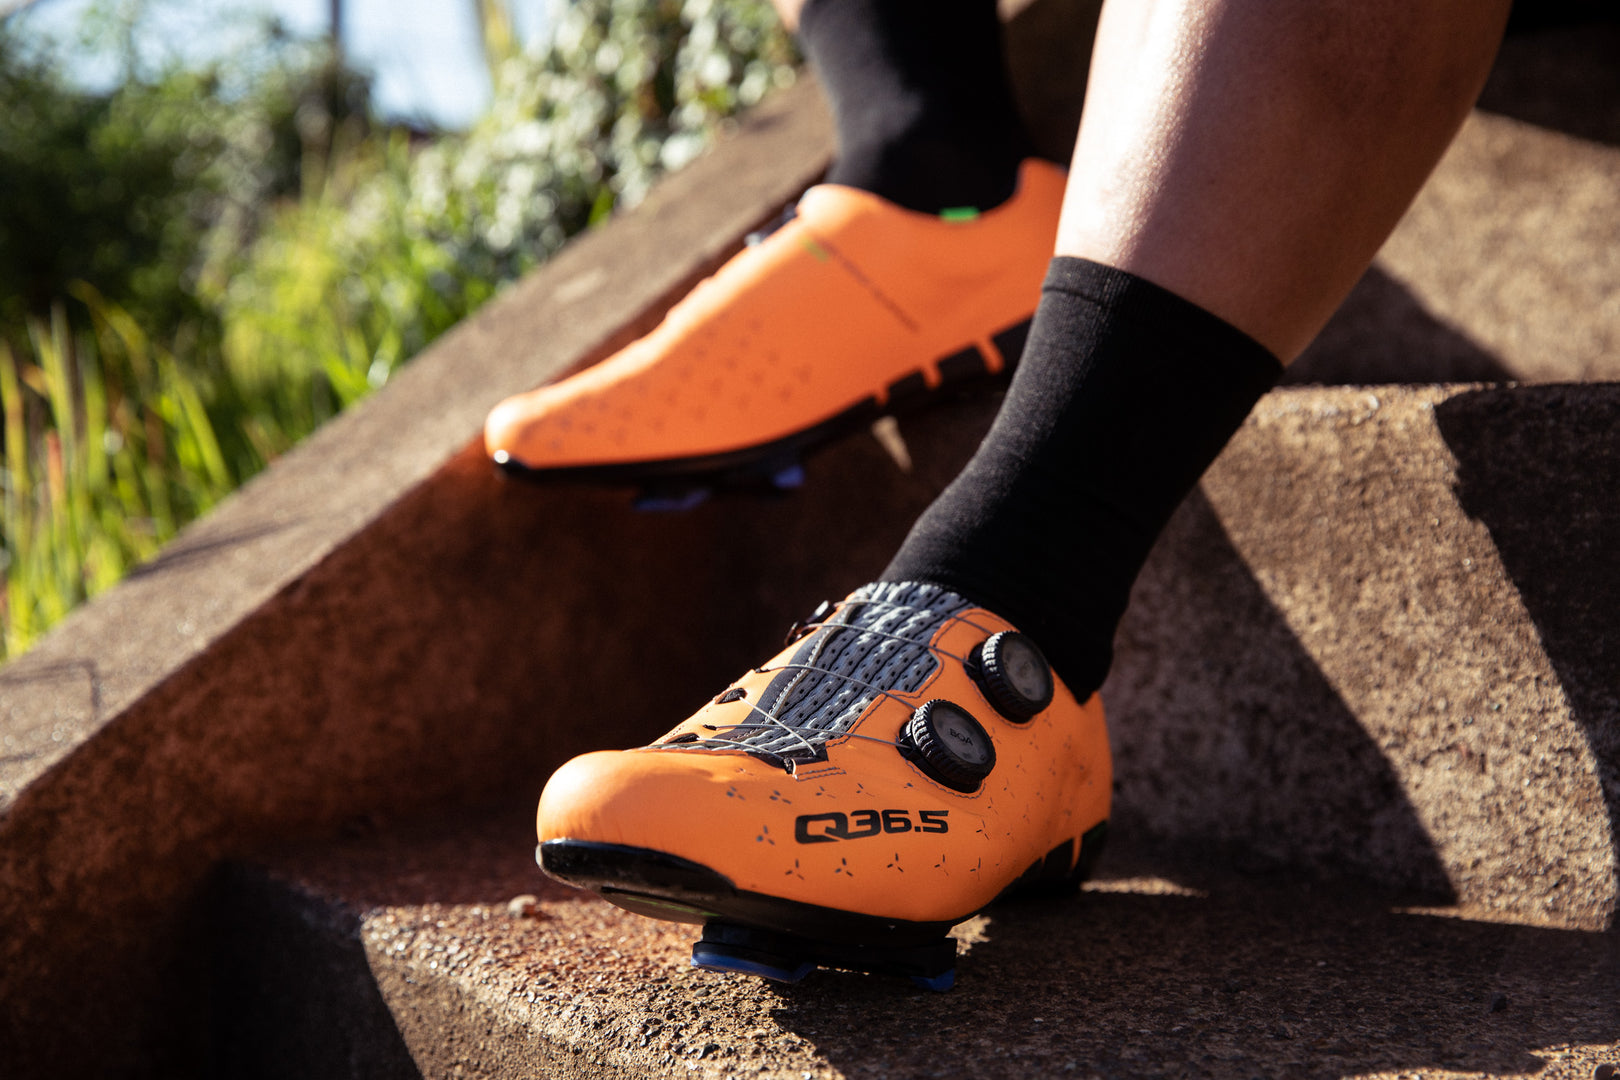 First Look: The Q36.5 Unique Cycling Shoes